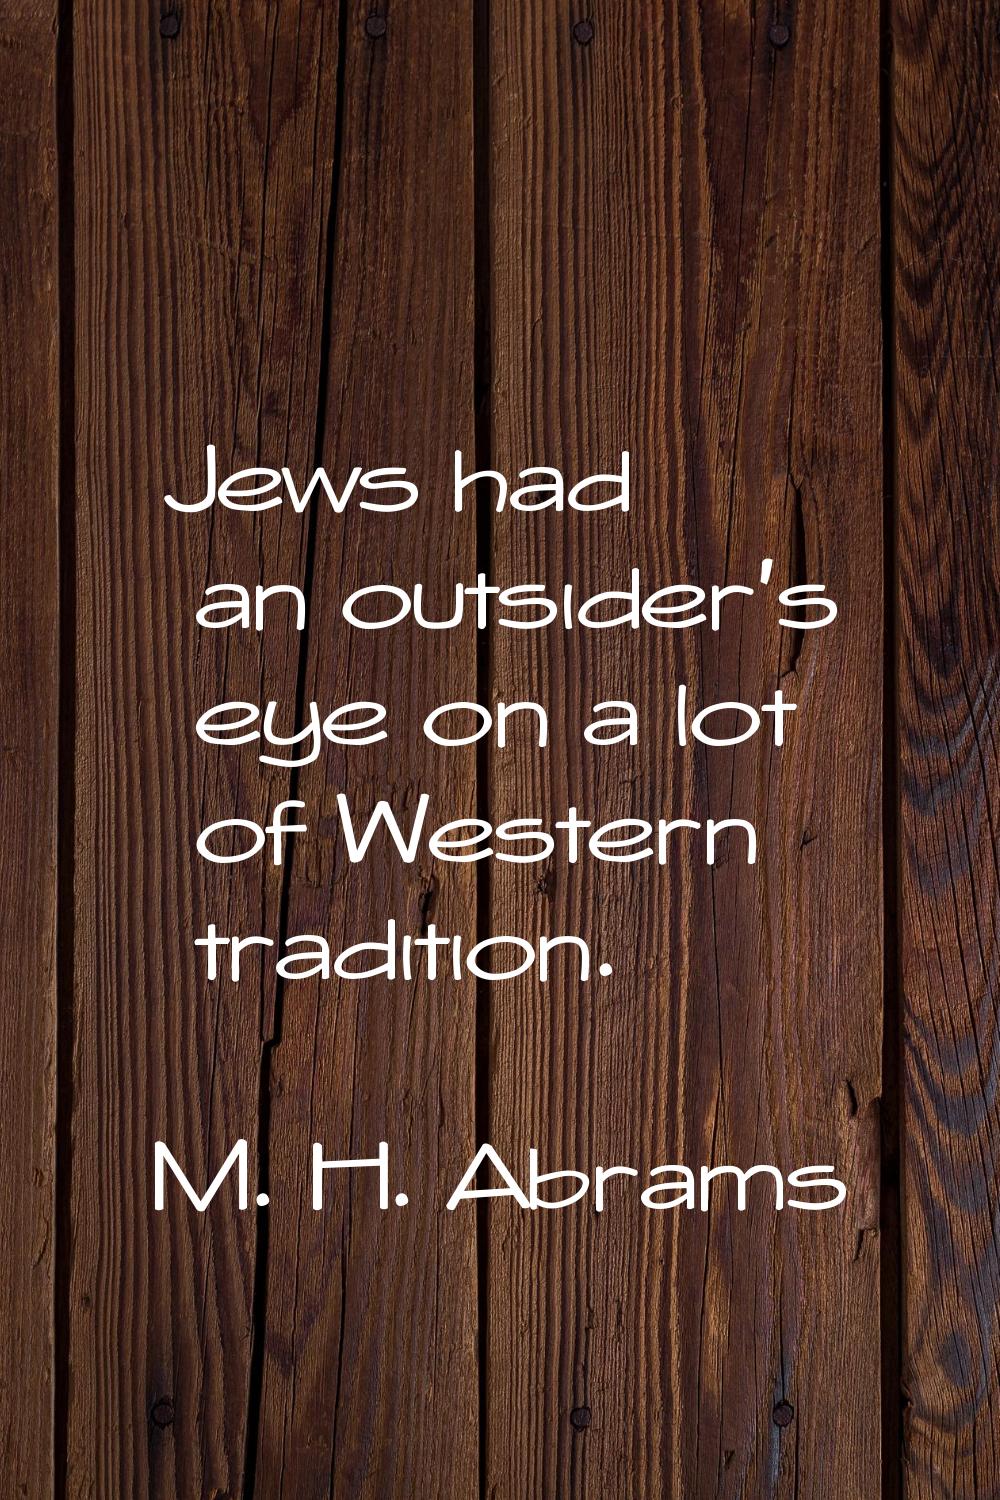 Jews had an outsider's eye on a lot of Western tradition.